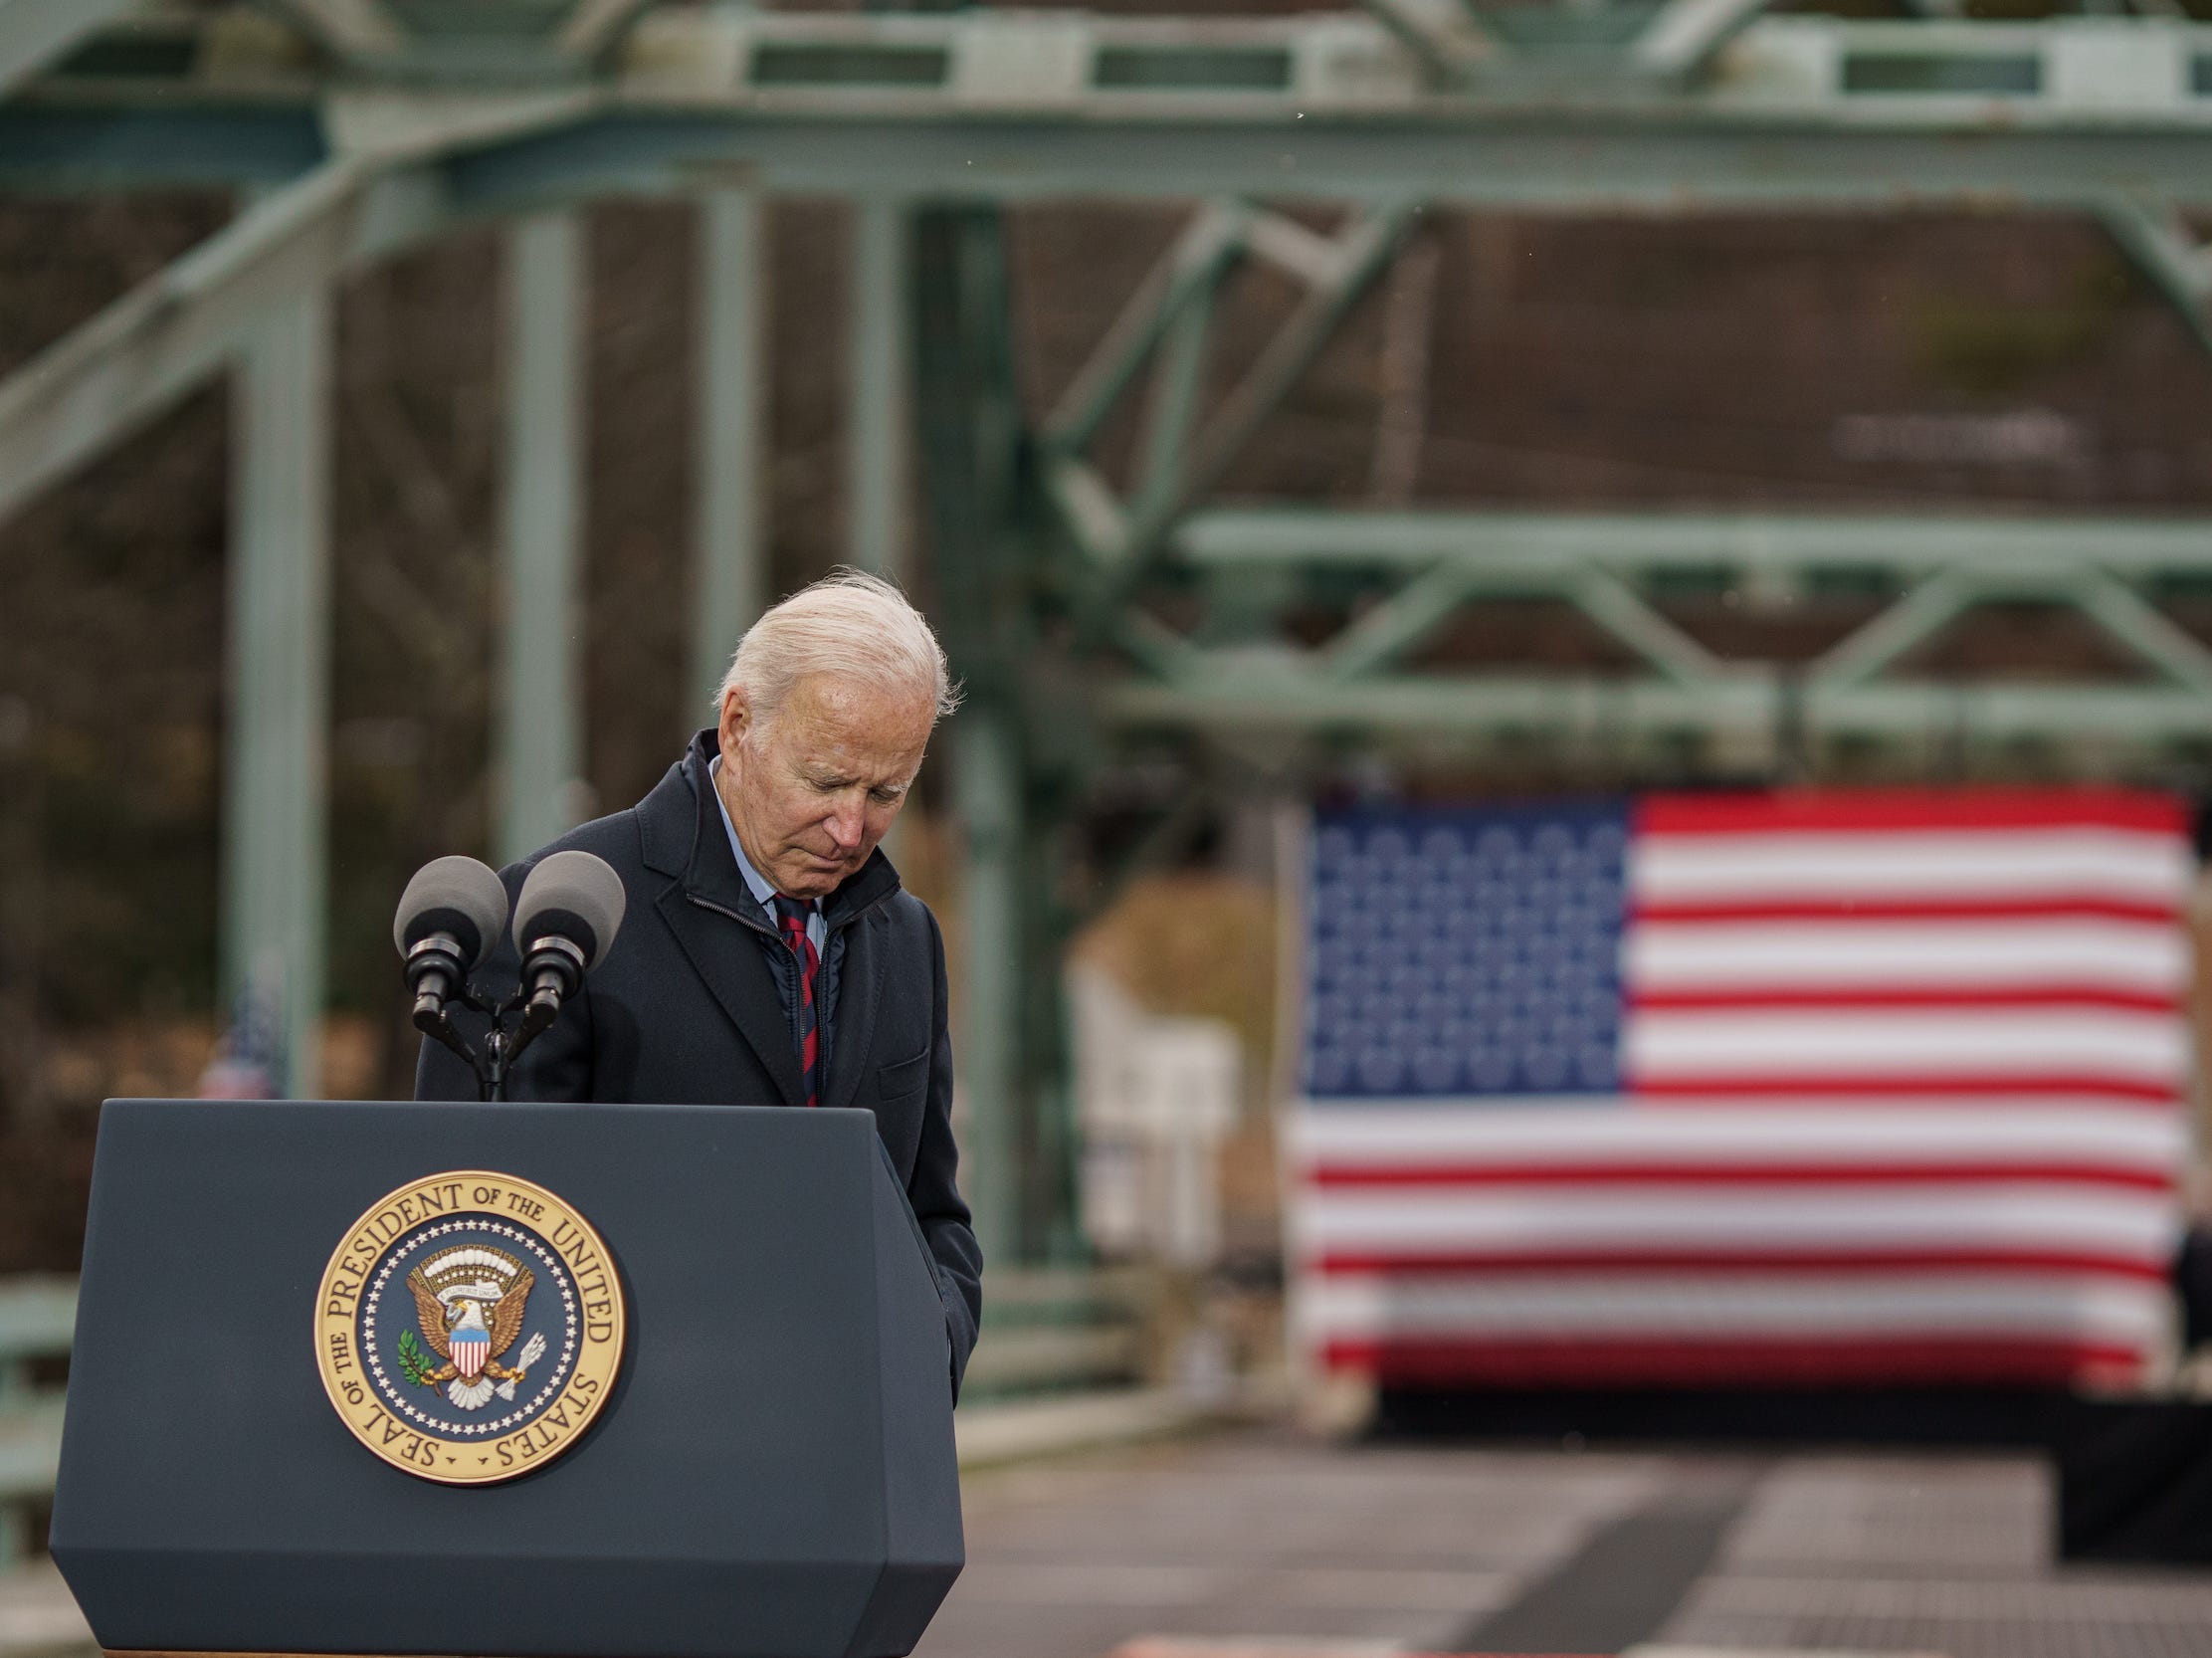 President Joe Biden delivers a speech on infrastructure while visiting the NH 175 bridge spanning the Pemigewasset River on November 16, 2021 in Woodstock, New Hampshire